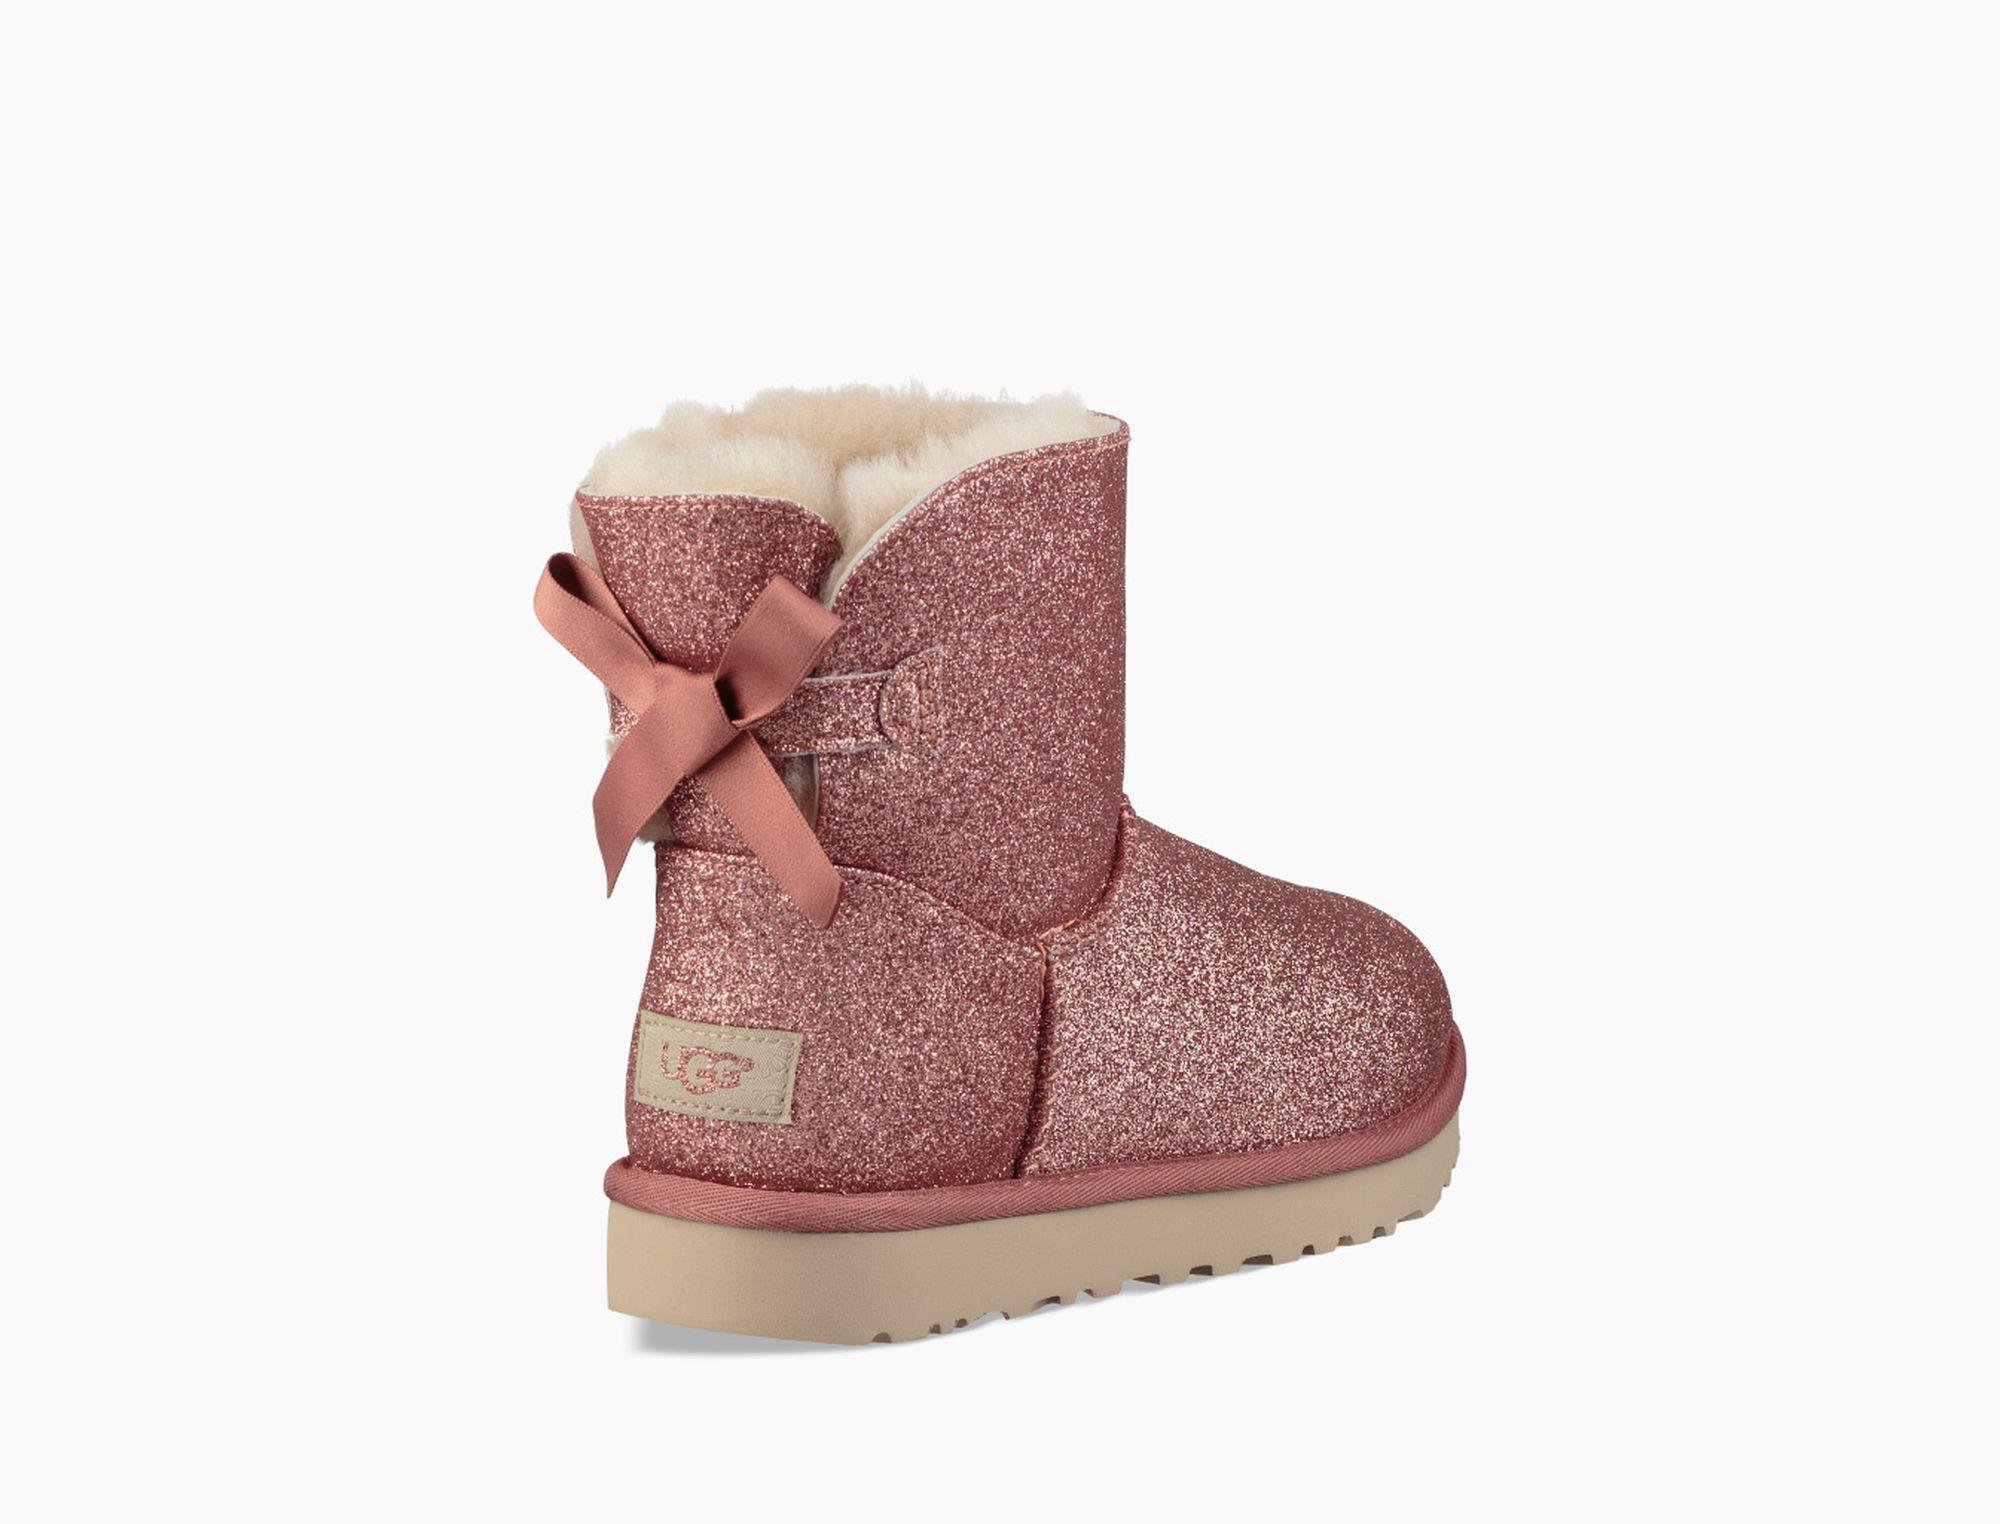 Buy > uggs sparkly boots > in stock